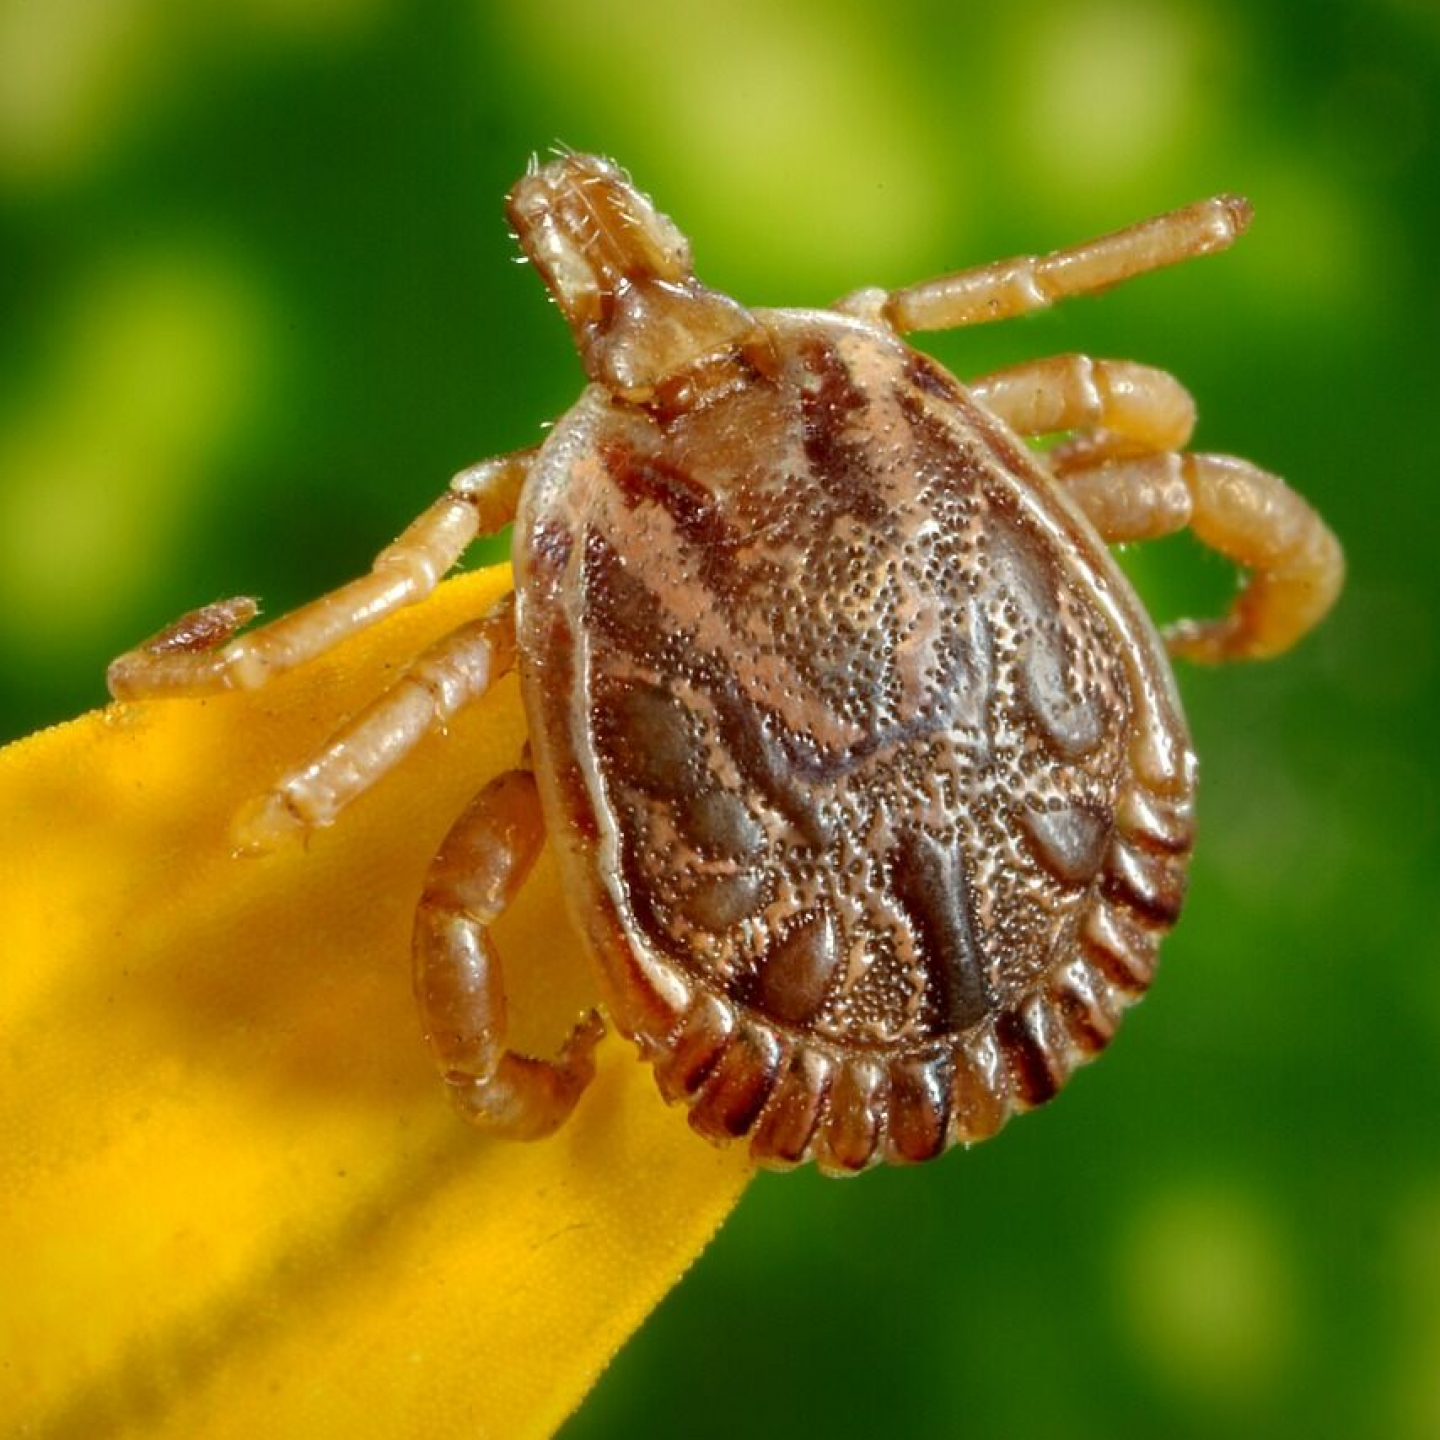 A close up of a tick on a yellow flower